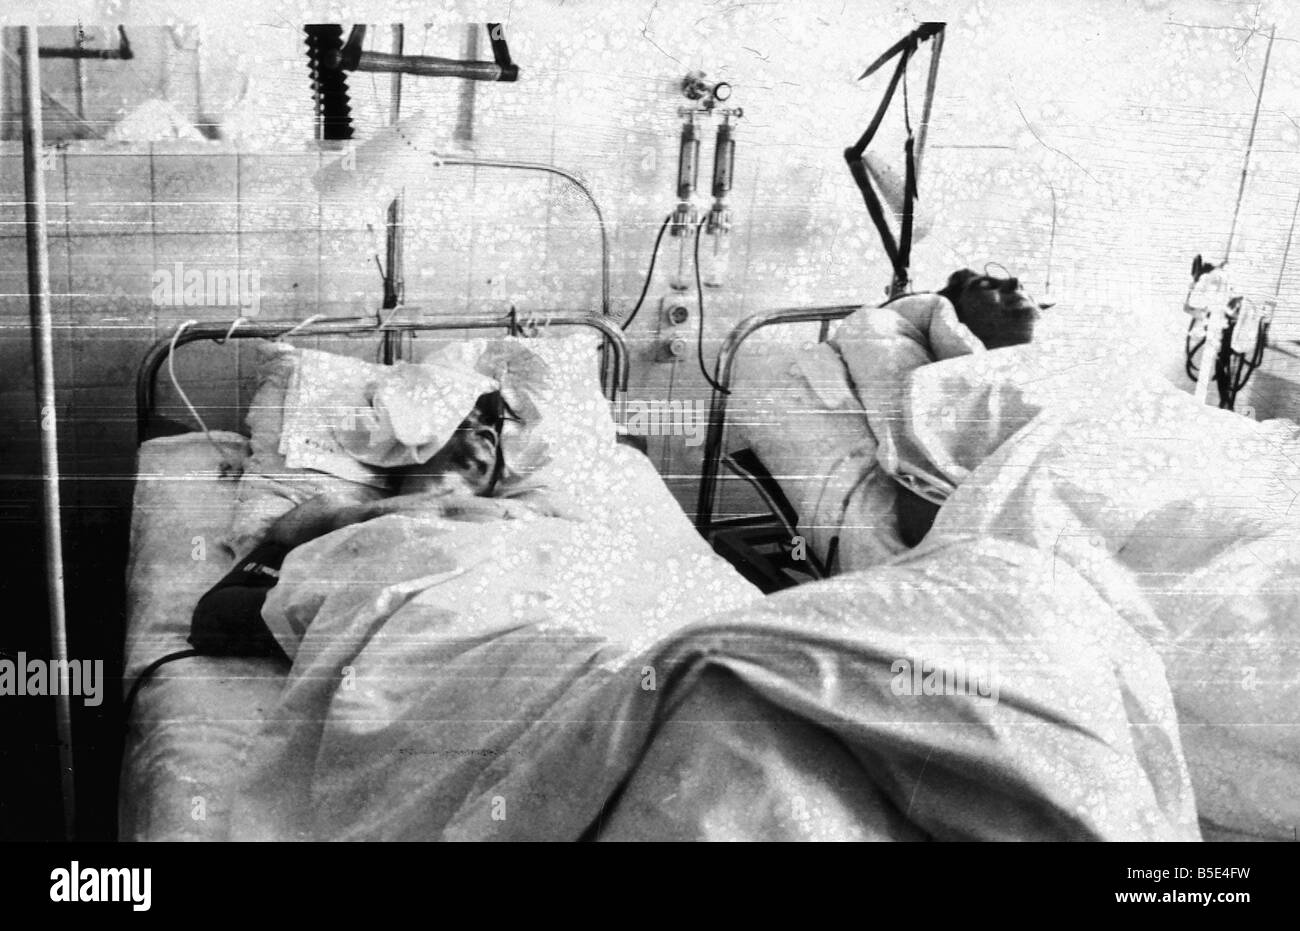 Duncan Edwards and John Berry in hospital beds 1958 after the Munich Air Disaster Stock Photo